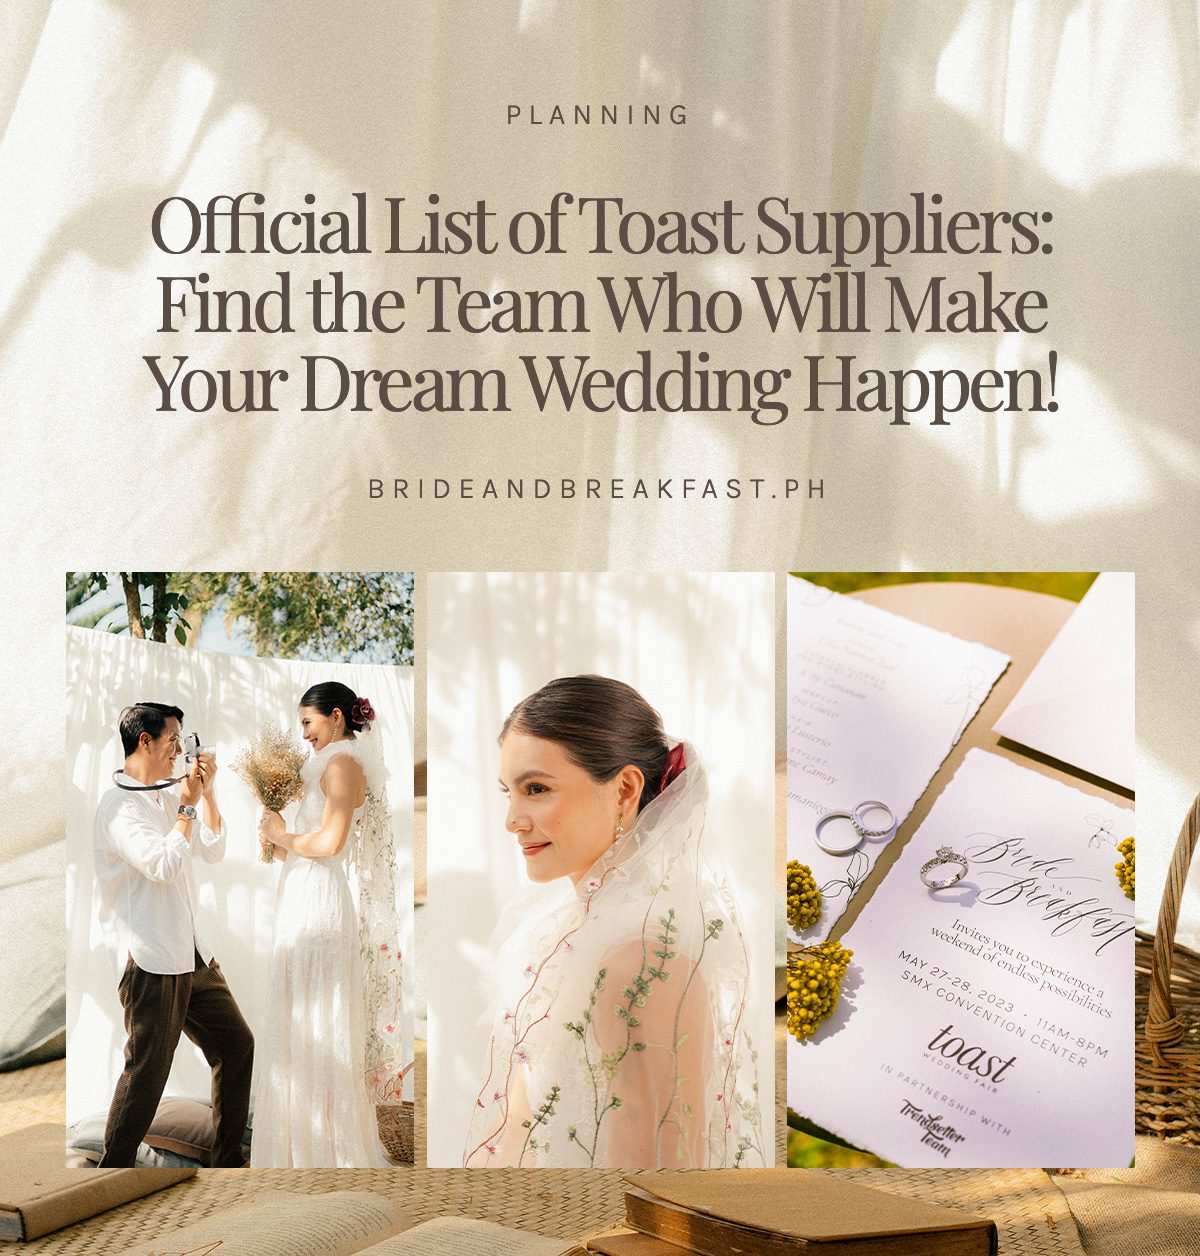 Official List of Toast Suppliers: Find the Team Who Will Make Your Dream Wedding Happen